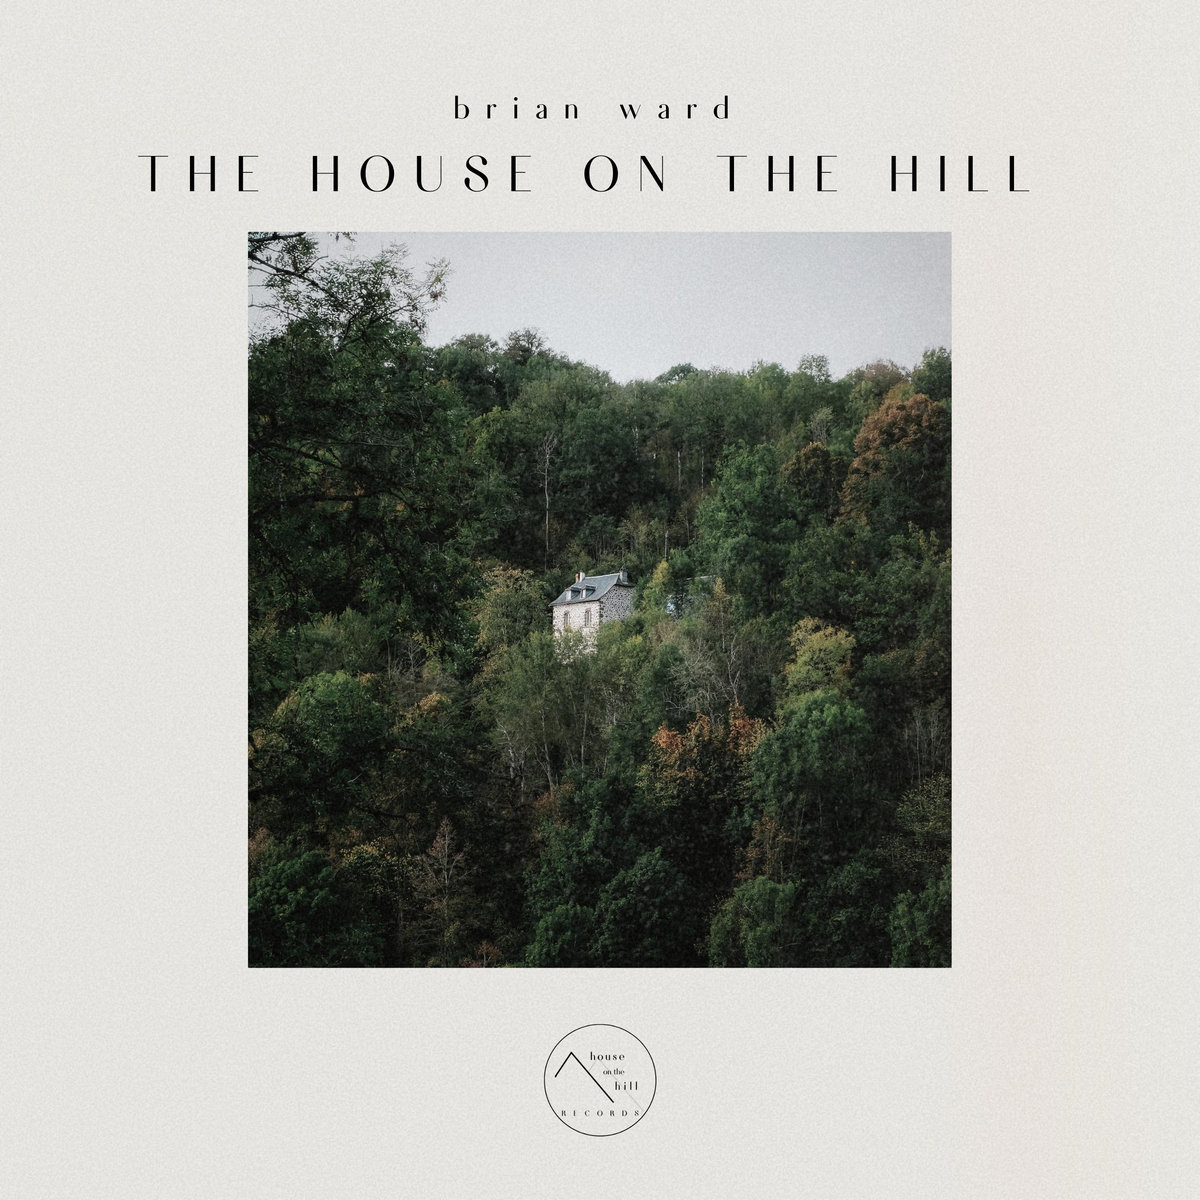 Vanguard V13 Captures Brian Ward's New Record "The House On The Hill"